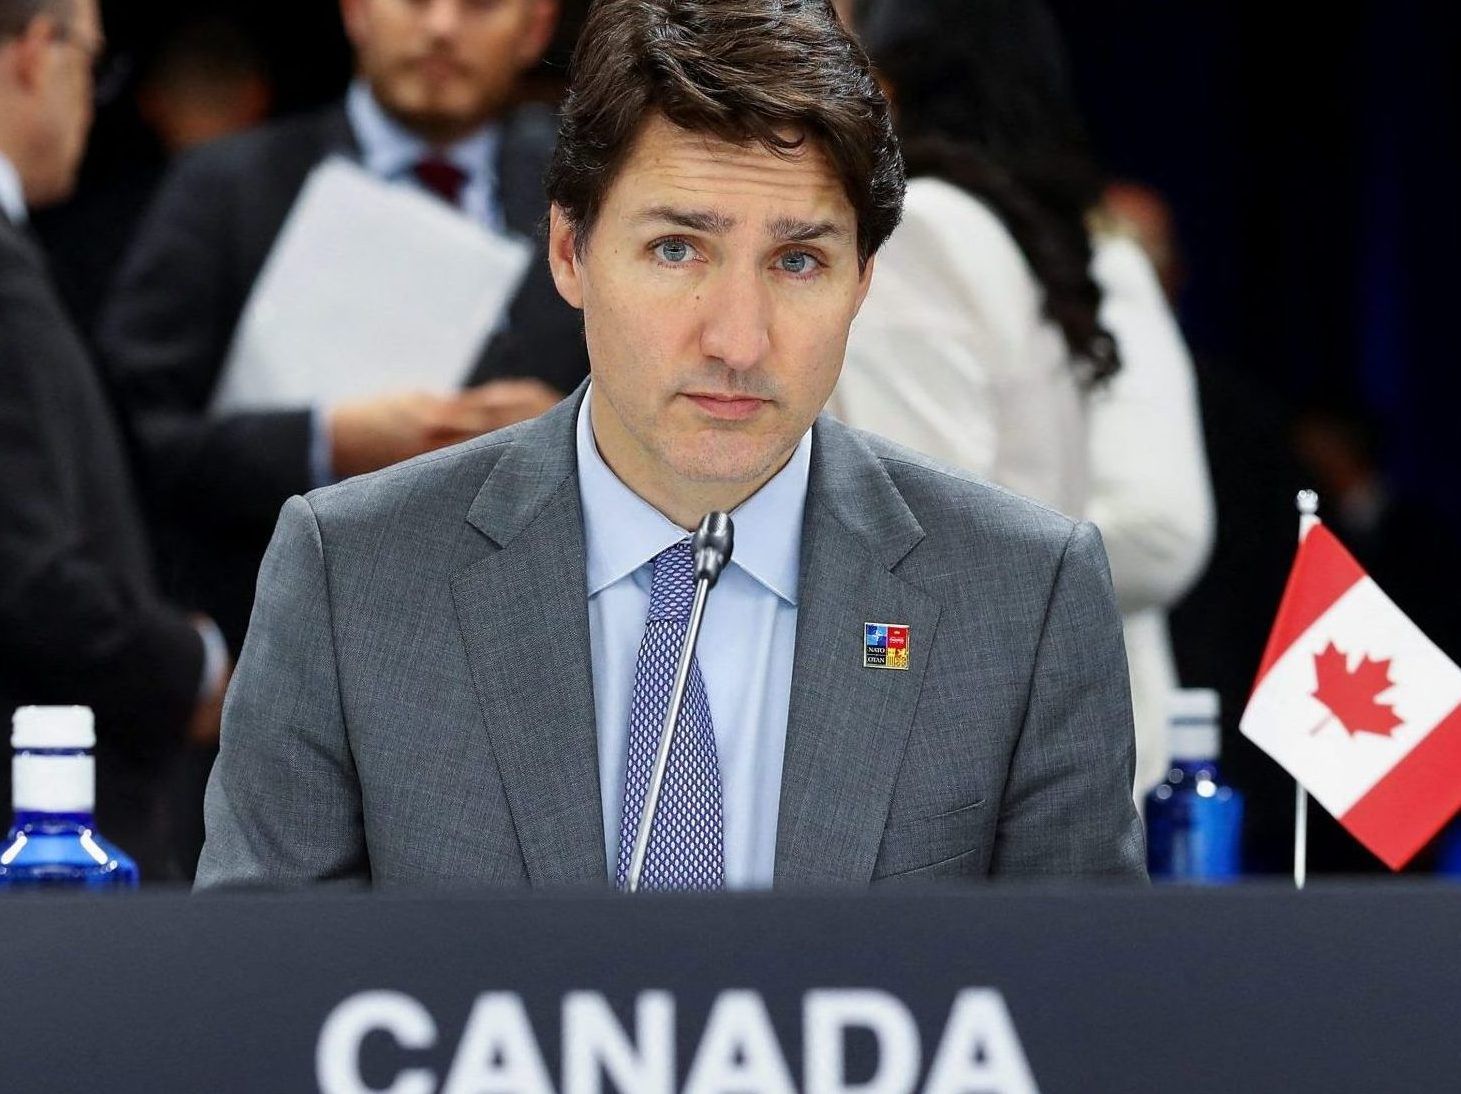 Canada will be at G20 summit this fall even if Putin attends: Trudeau